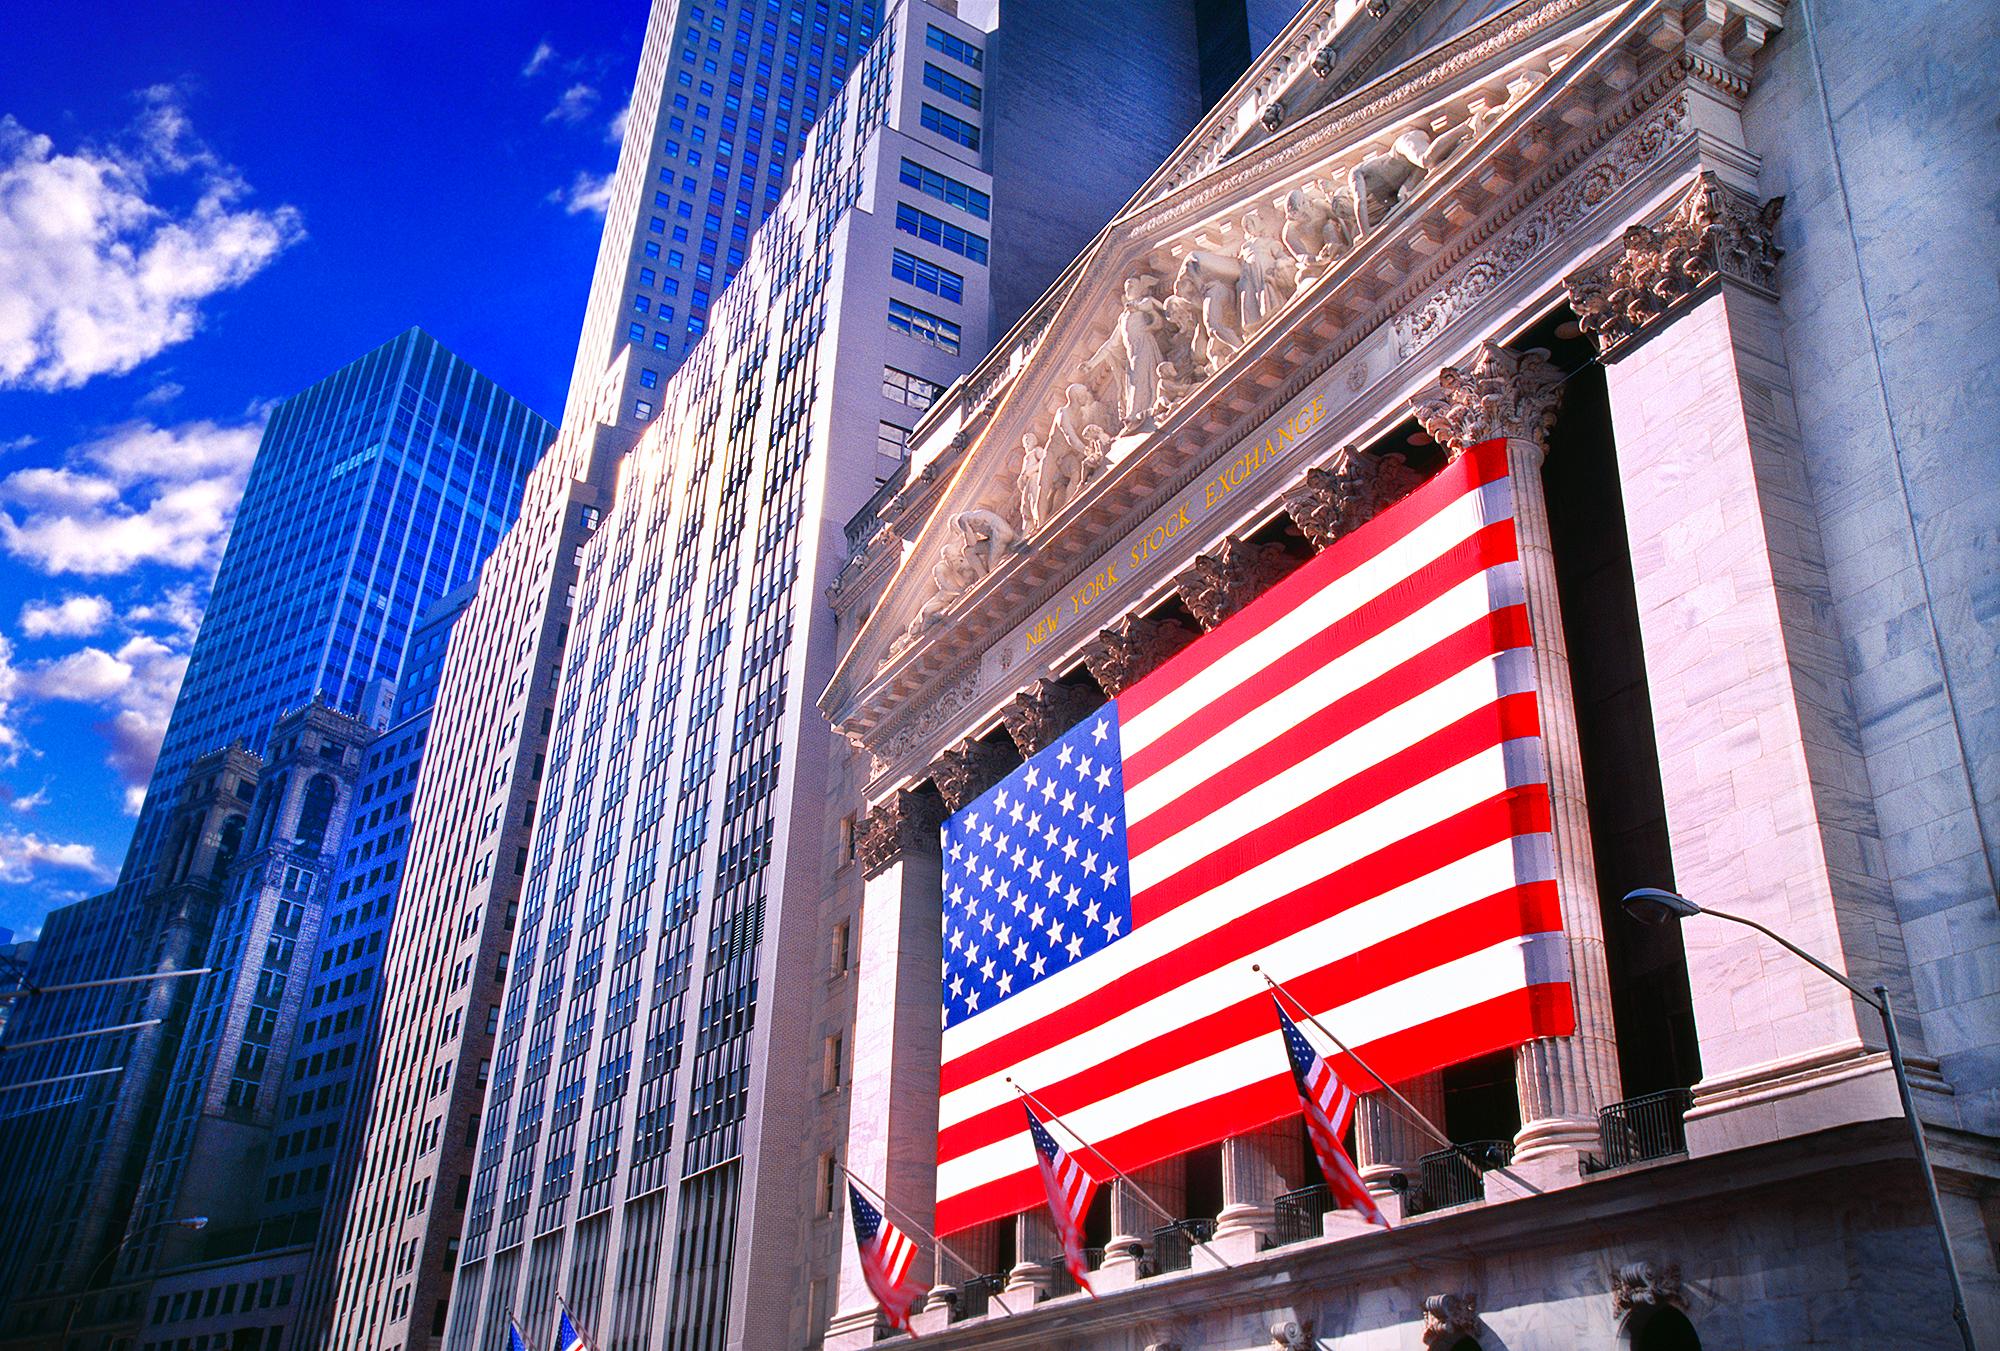 Mitchell Funk Landscape Photograph - New York Stock Exchange with American Flag  - American Capitalism